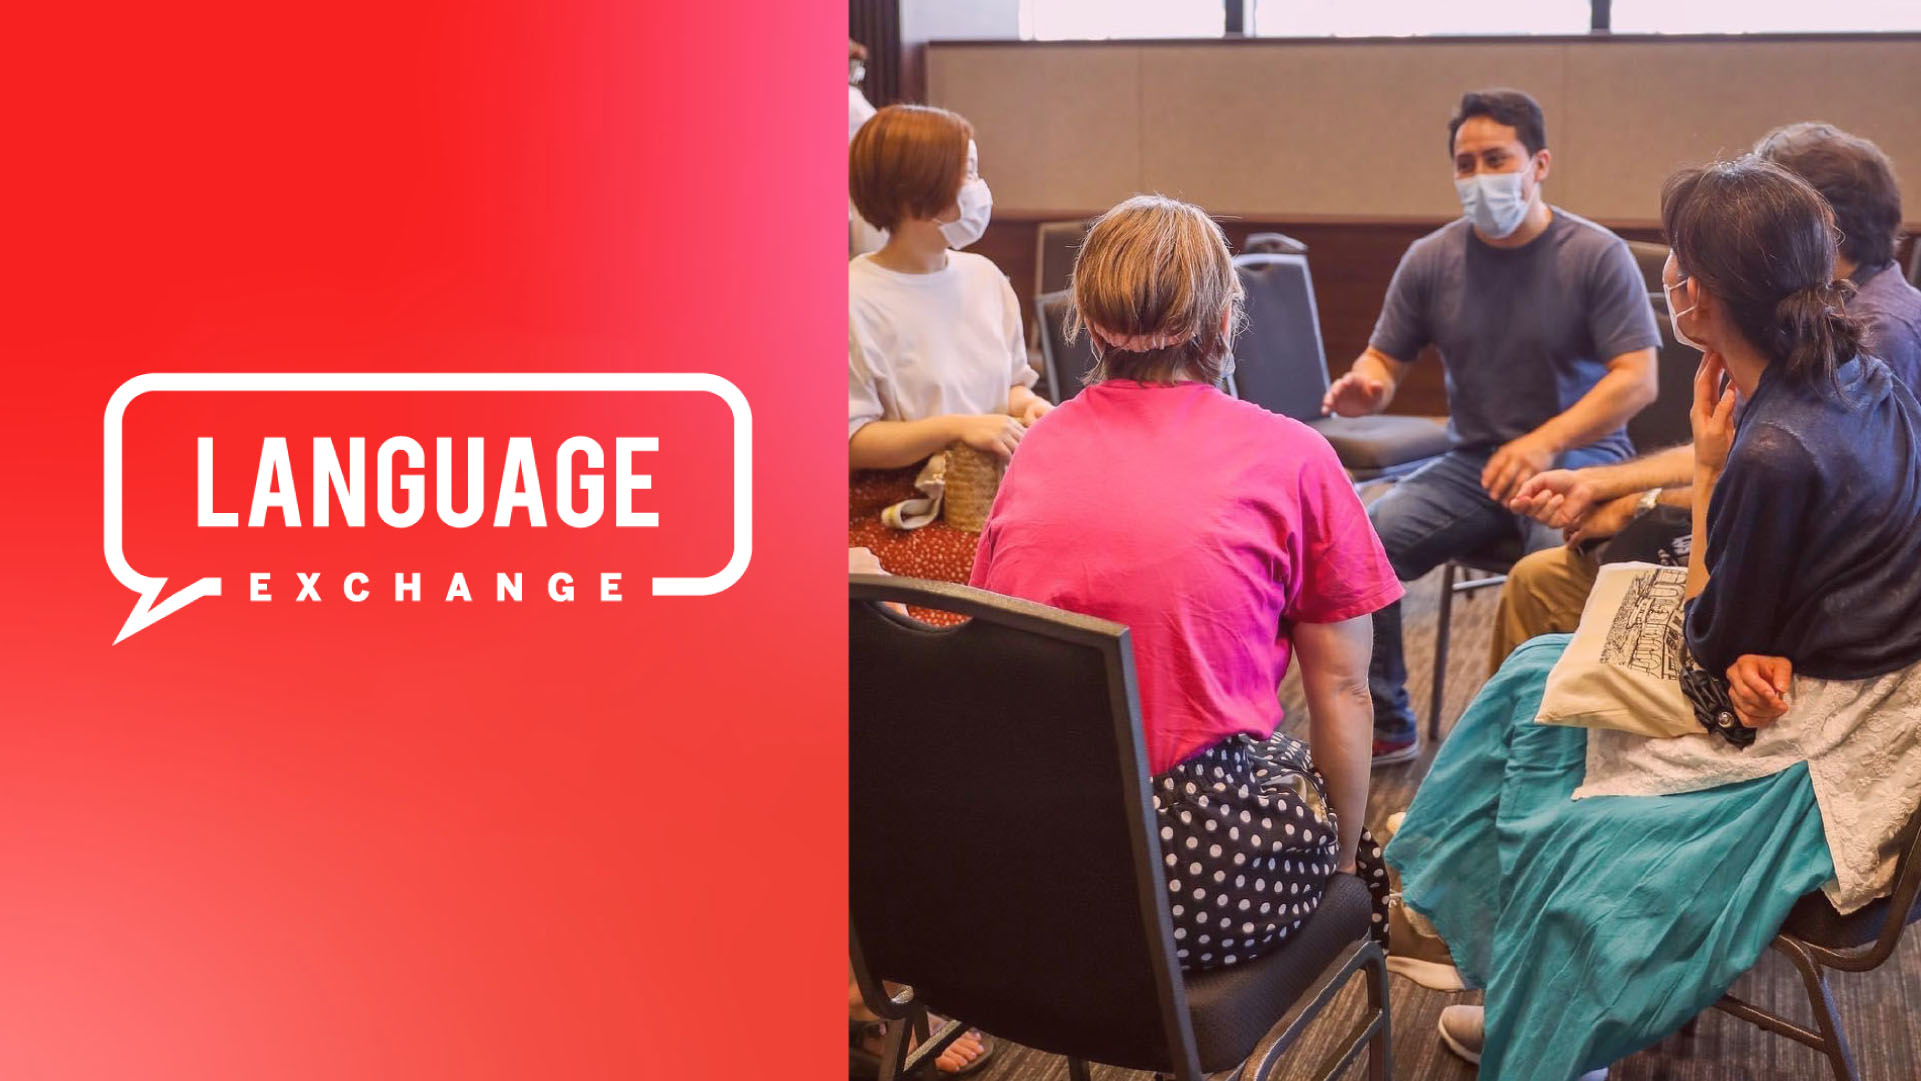 Featured image for “Language Exchange”